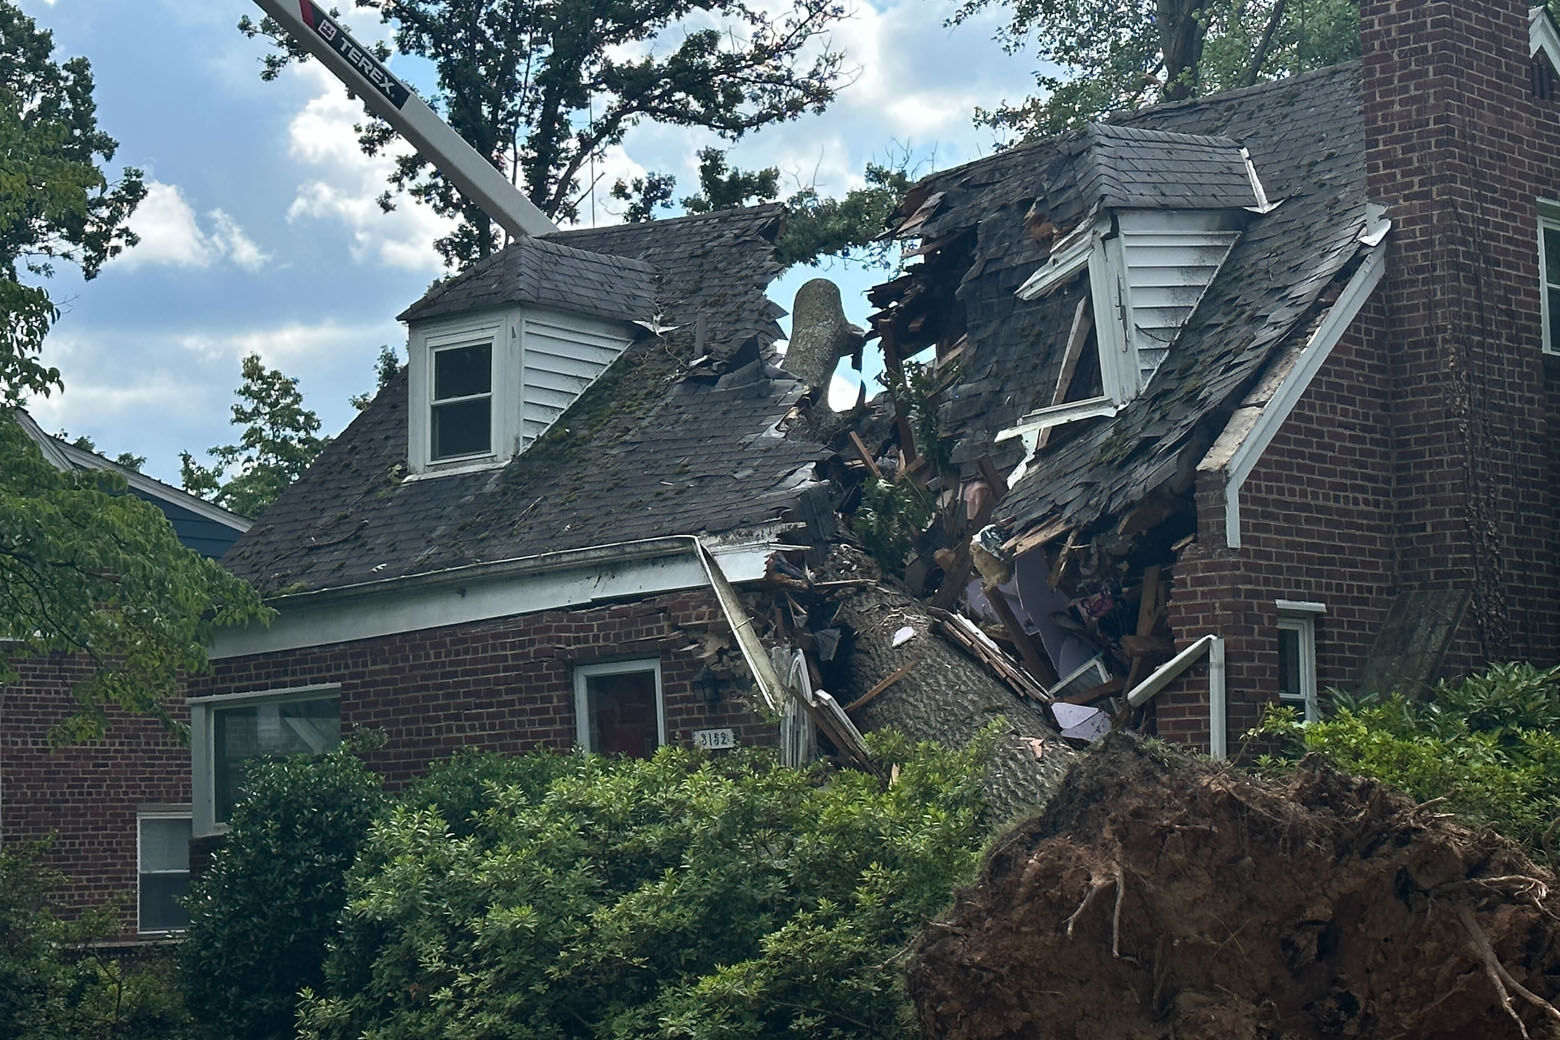 The D.C. region continues to recover after a severe storm ripped through the area on Saturday, toppling trees, and knocking out power for thousands across the area. (WTOP/Cheynne Corin)